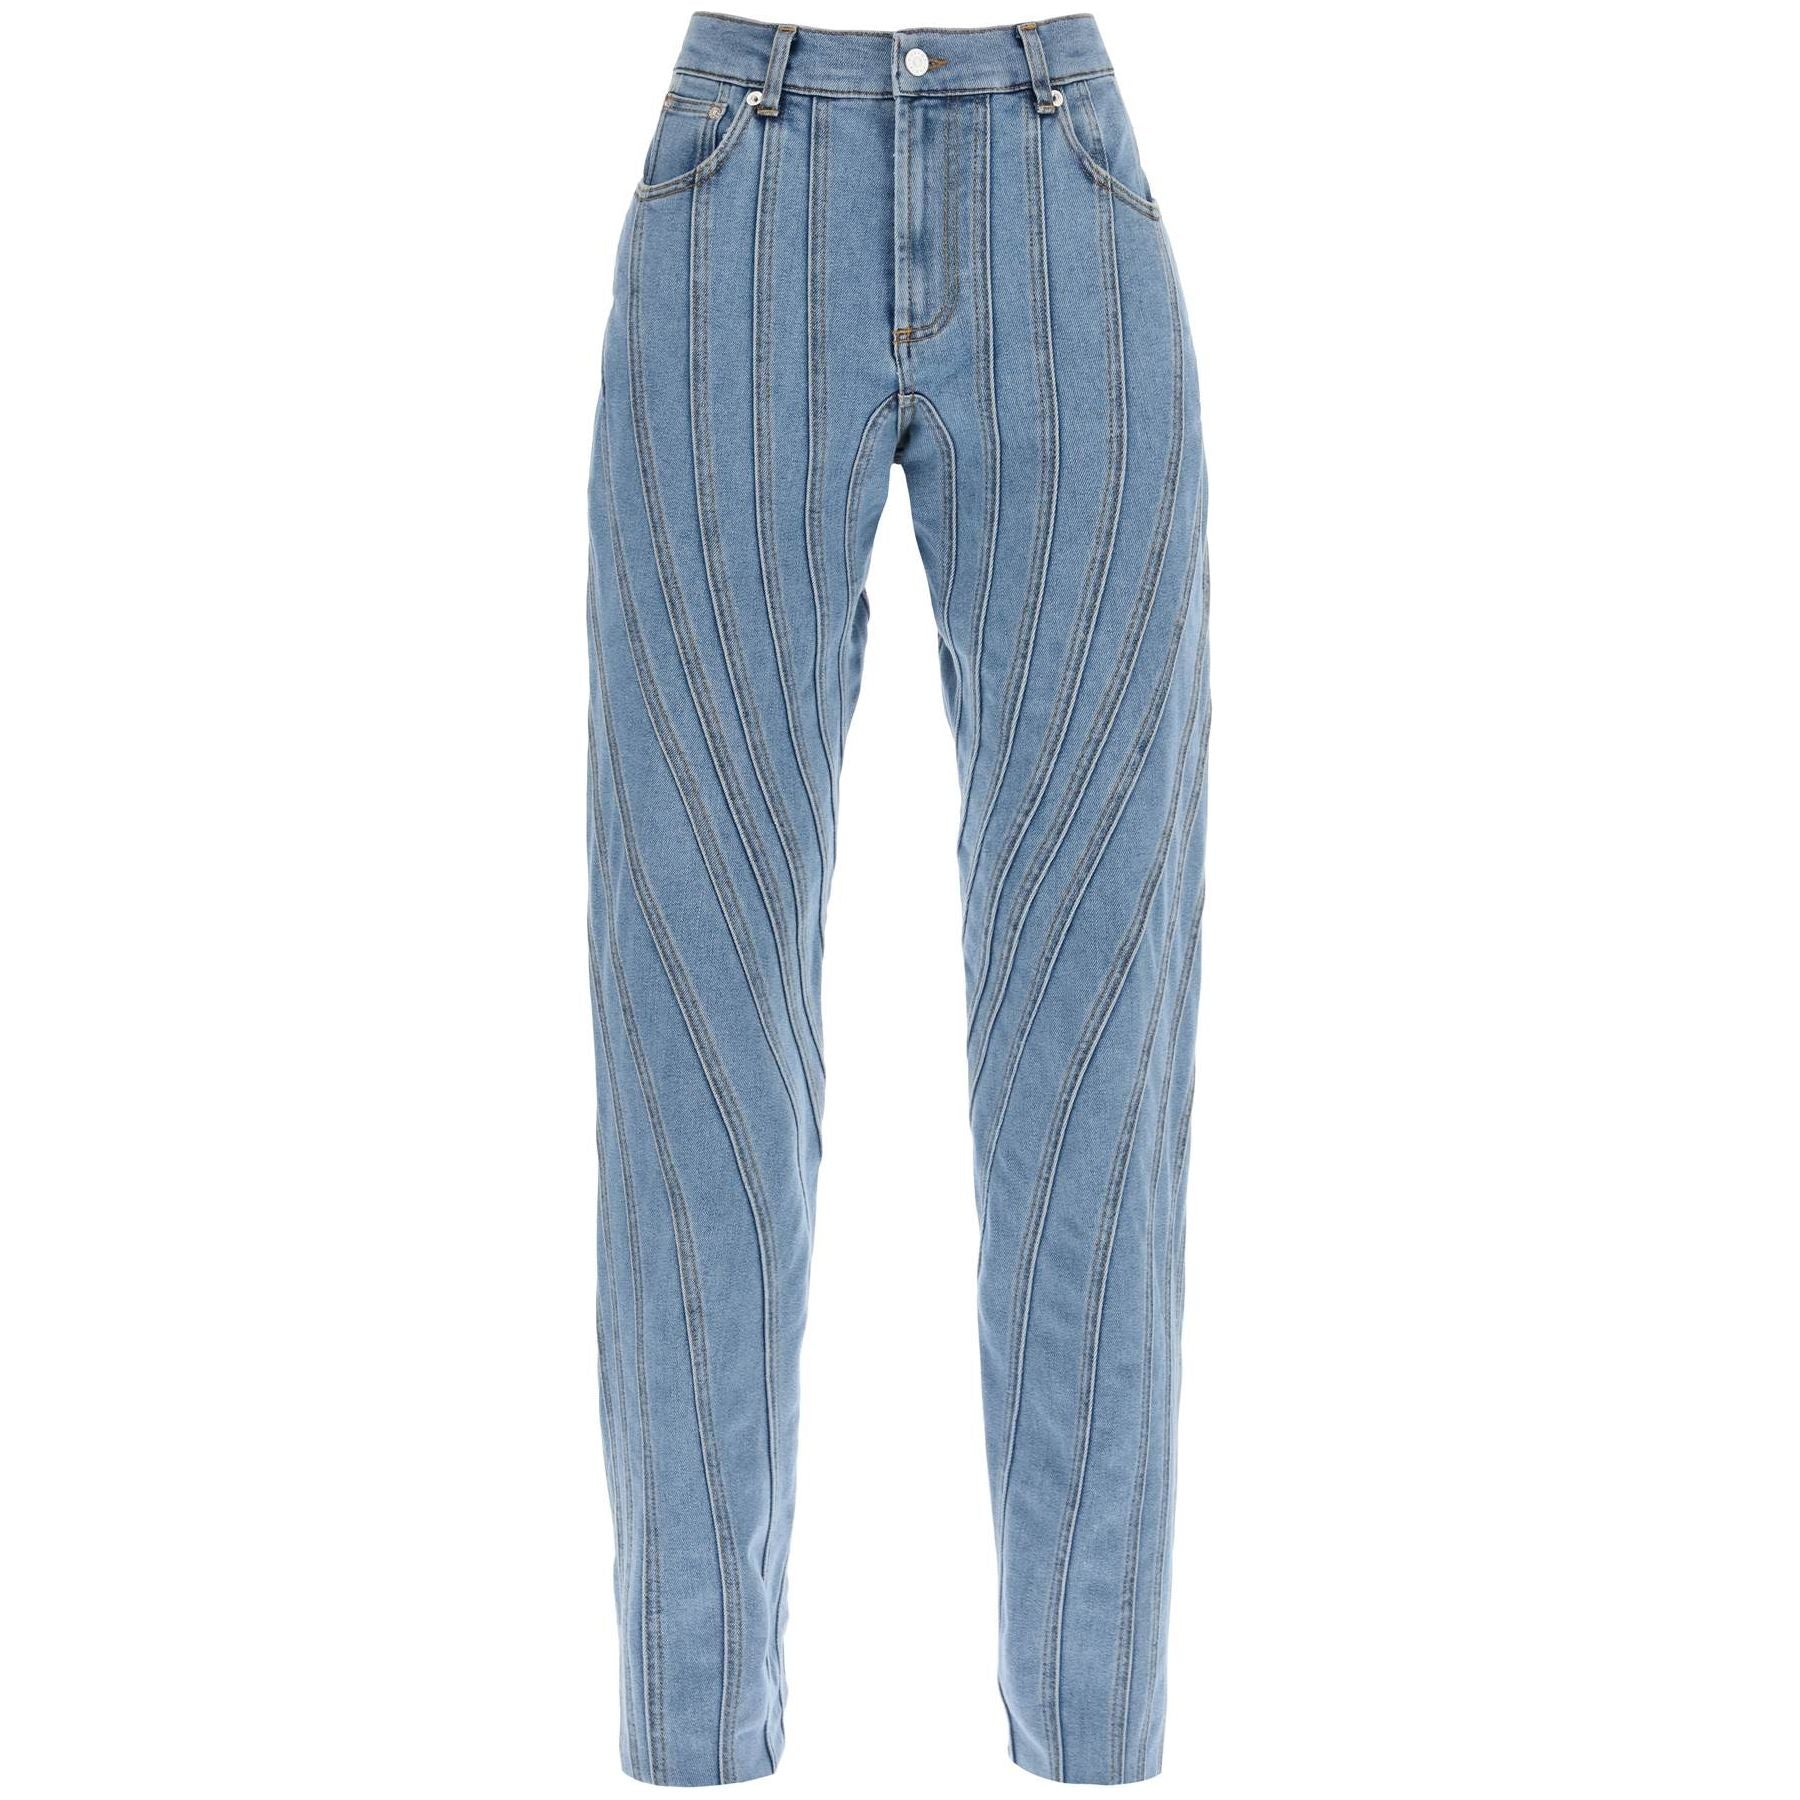 Spiral Baggy Jeans